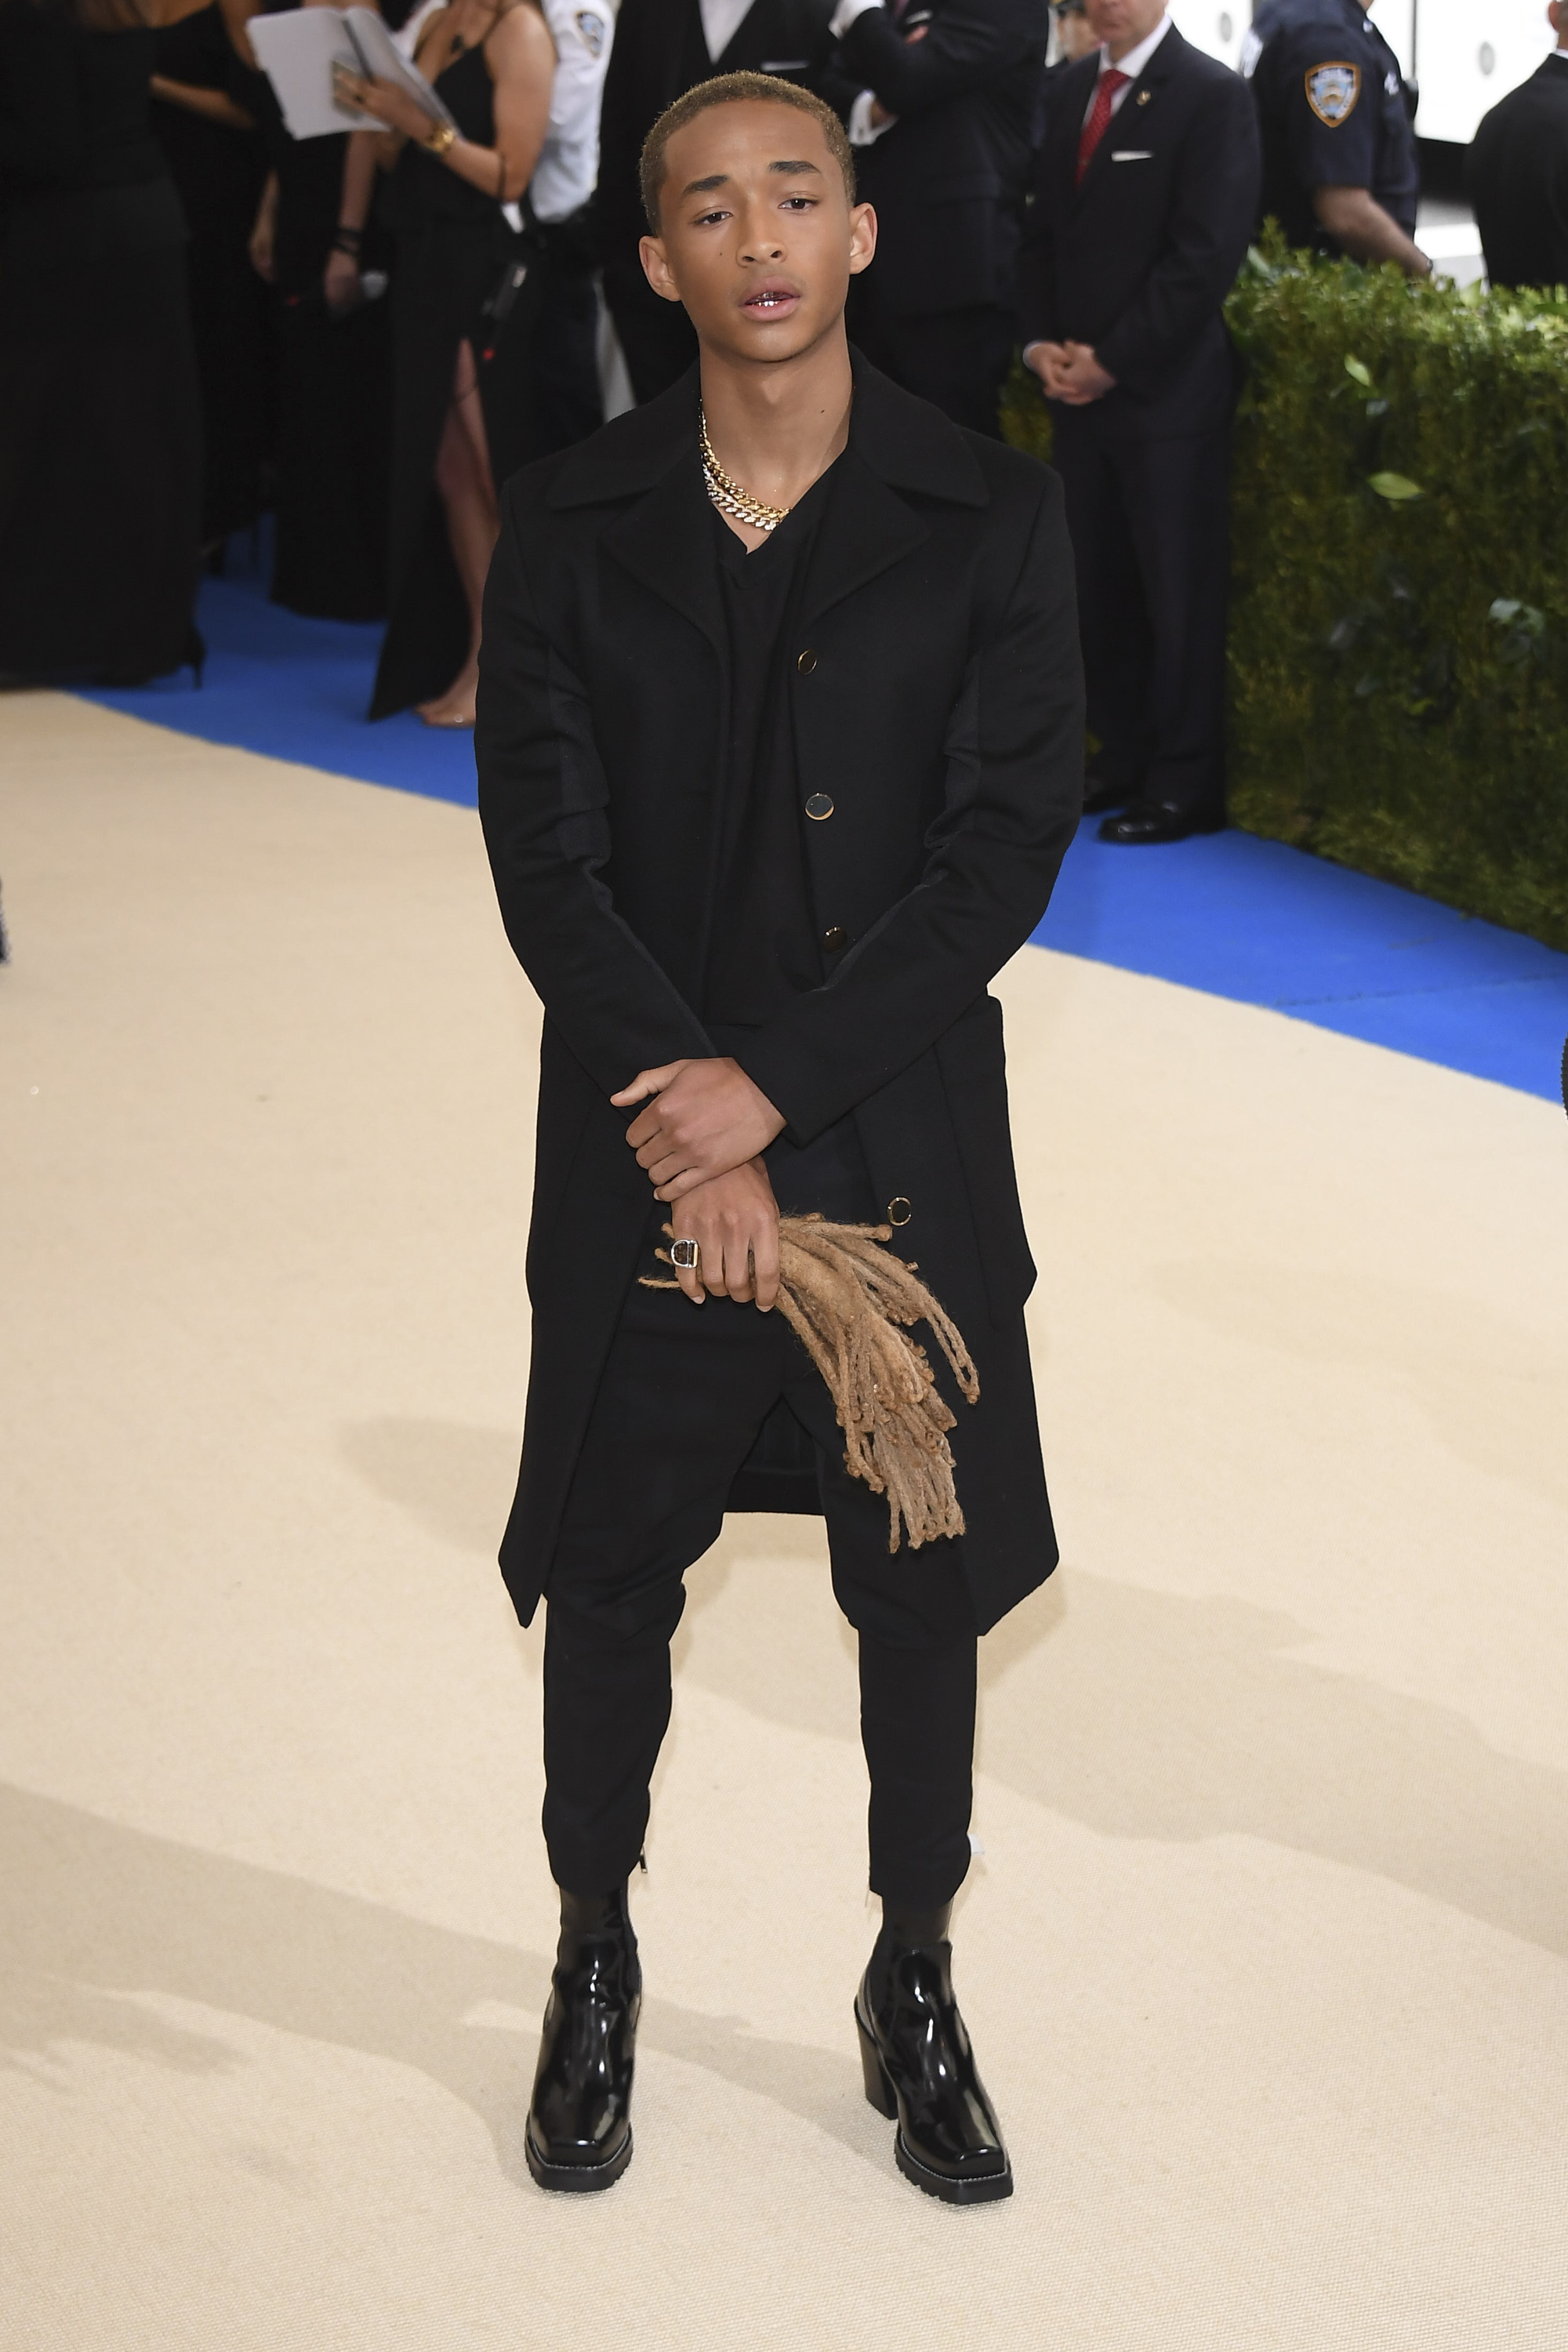 Jaden Smith Walks Met Gala 2017 Red Carpet With Fistful of His Own